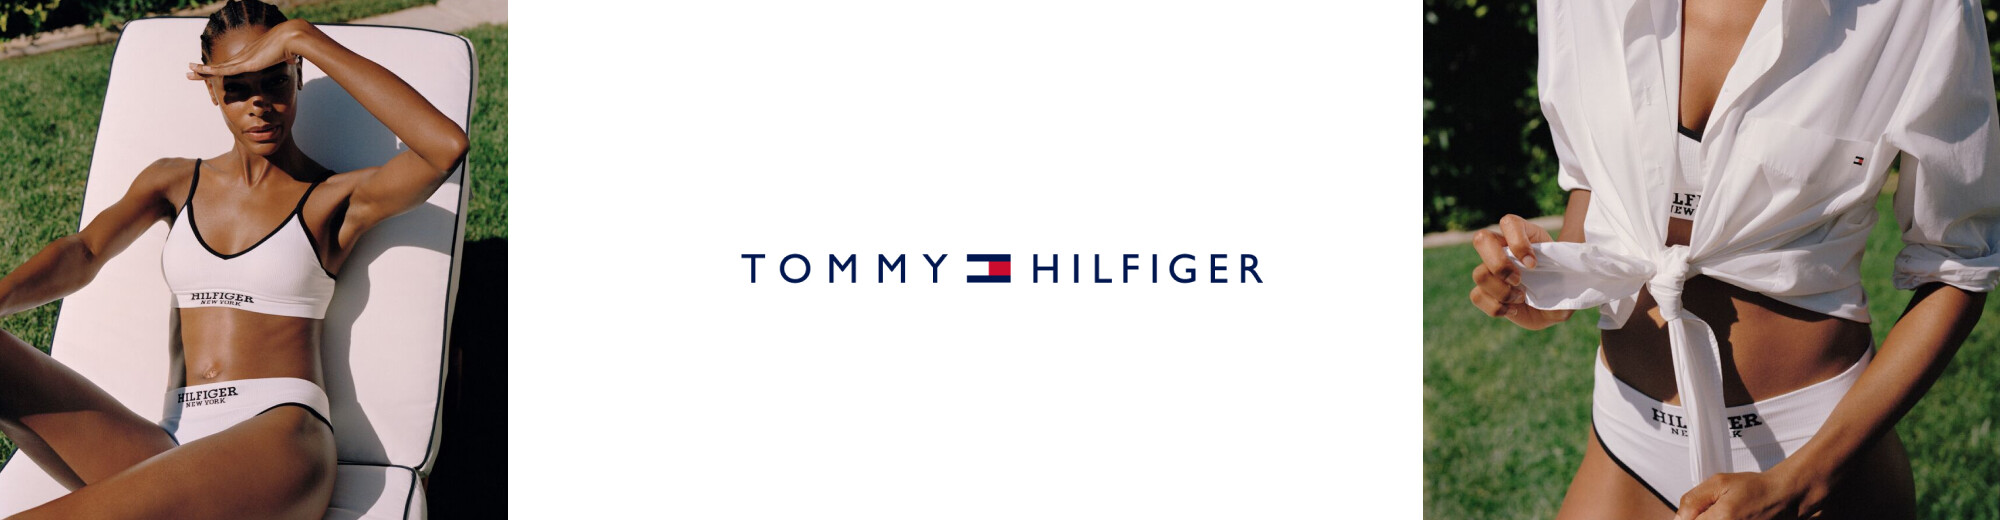 Ropa interior Mujer Tommy Hilfiger